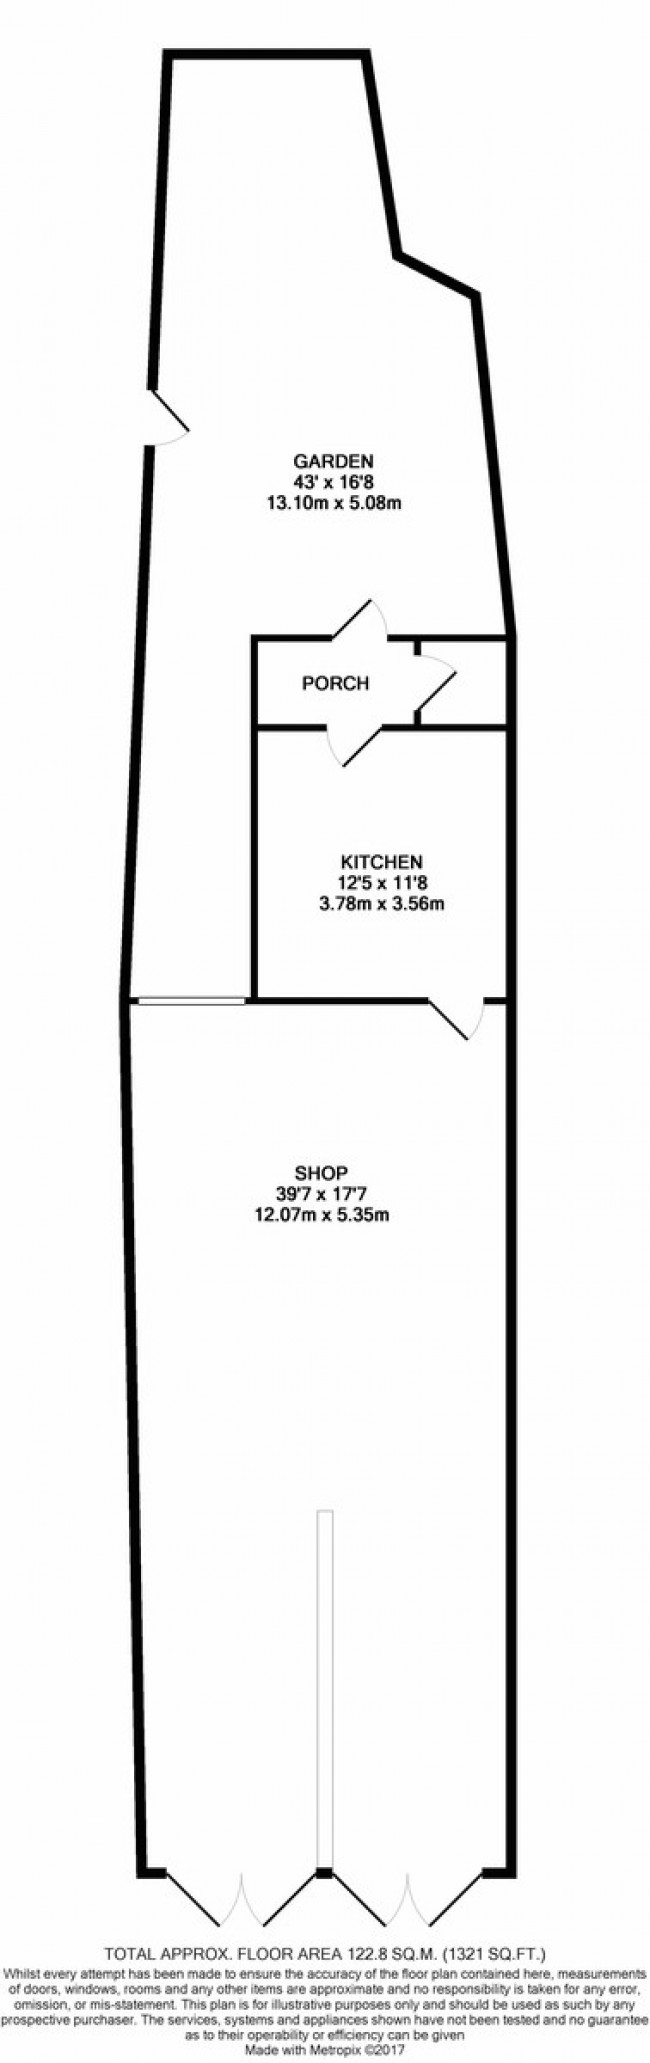 Floorplan for Church Road , Willesden, nw10 9nh